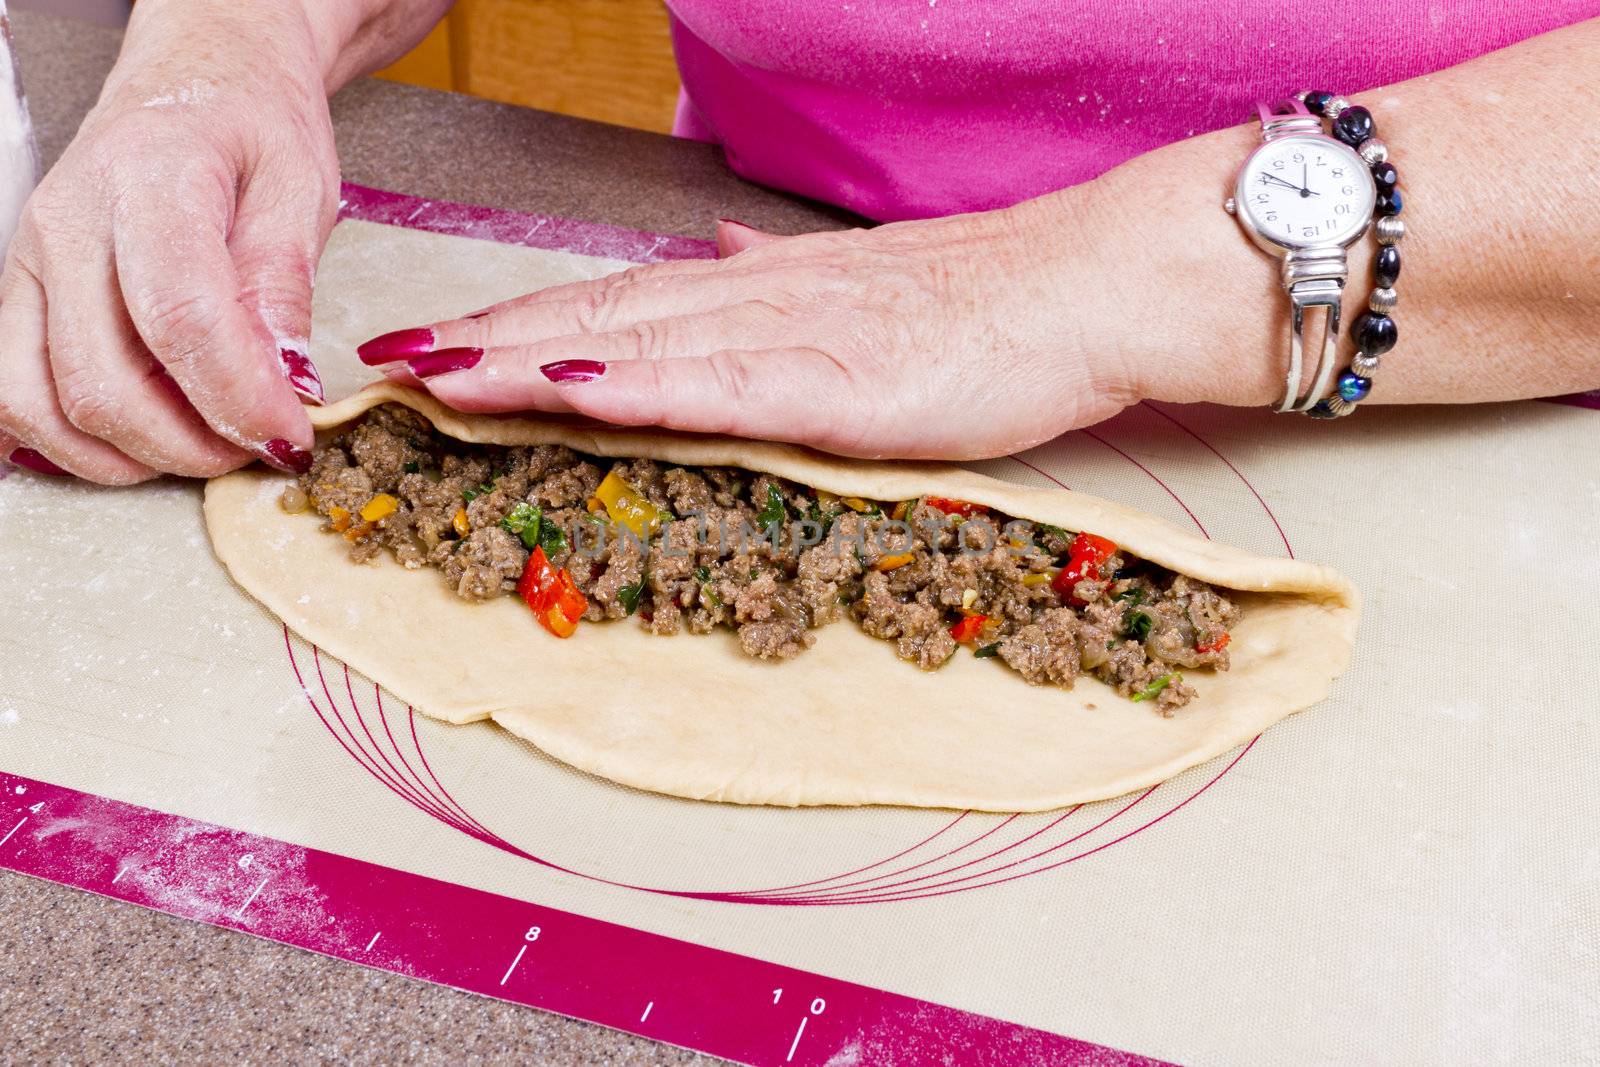 Experienced Hands Wrapping the Pide by coskun